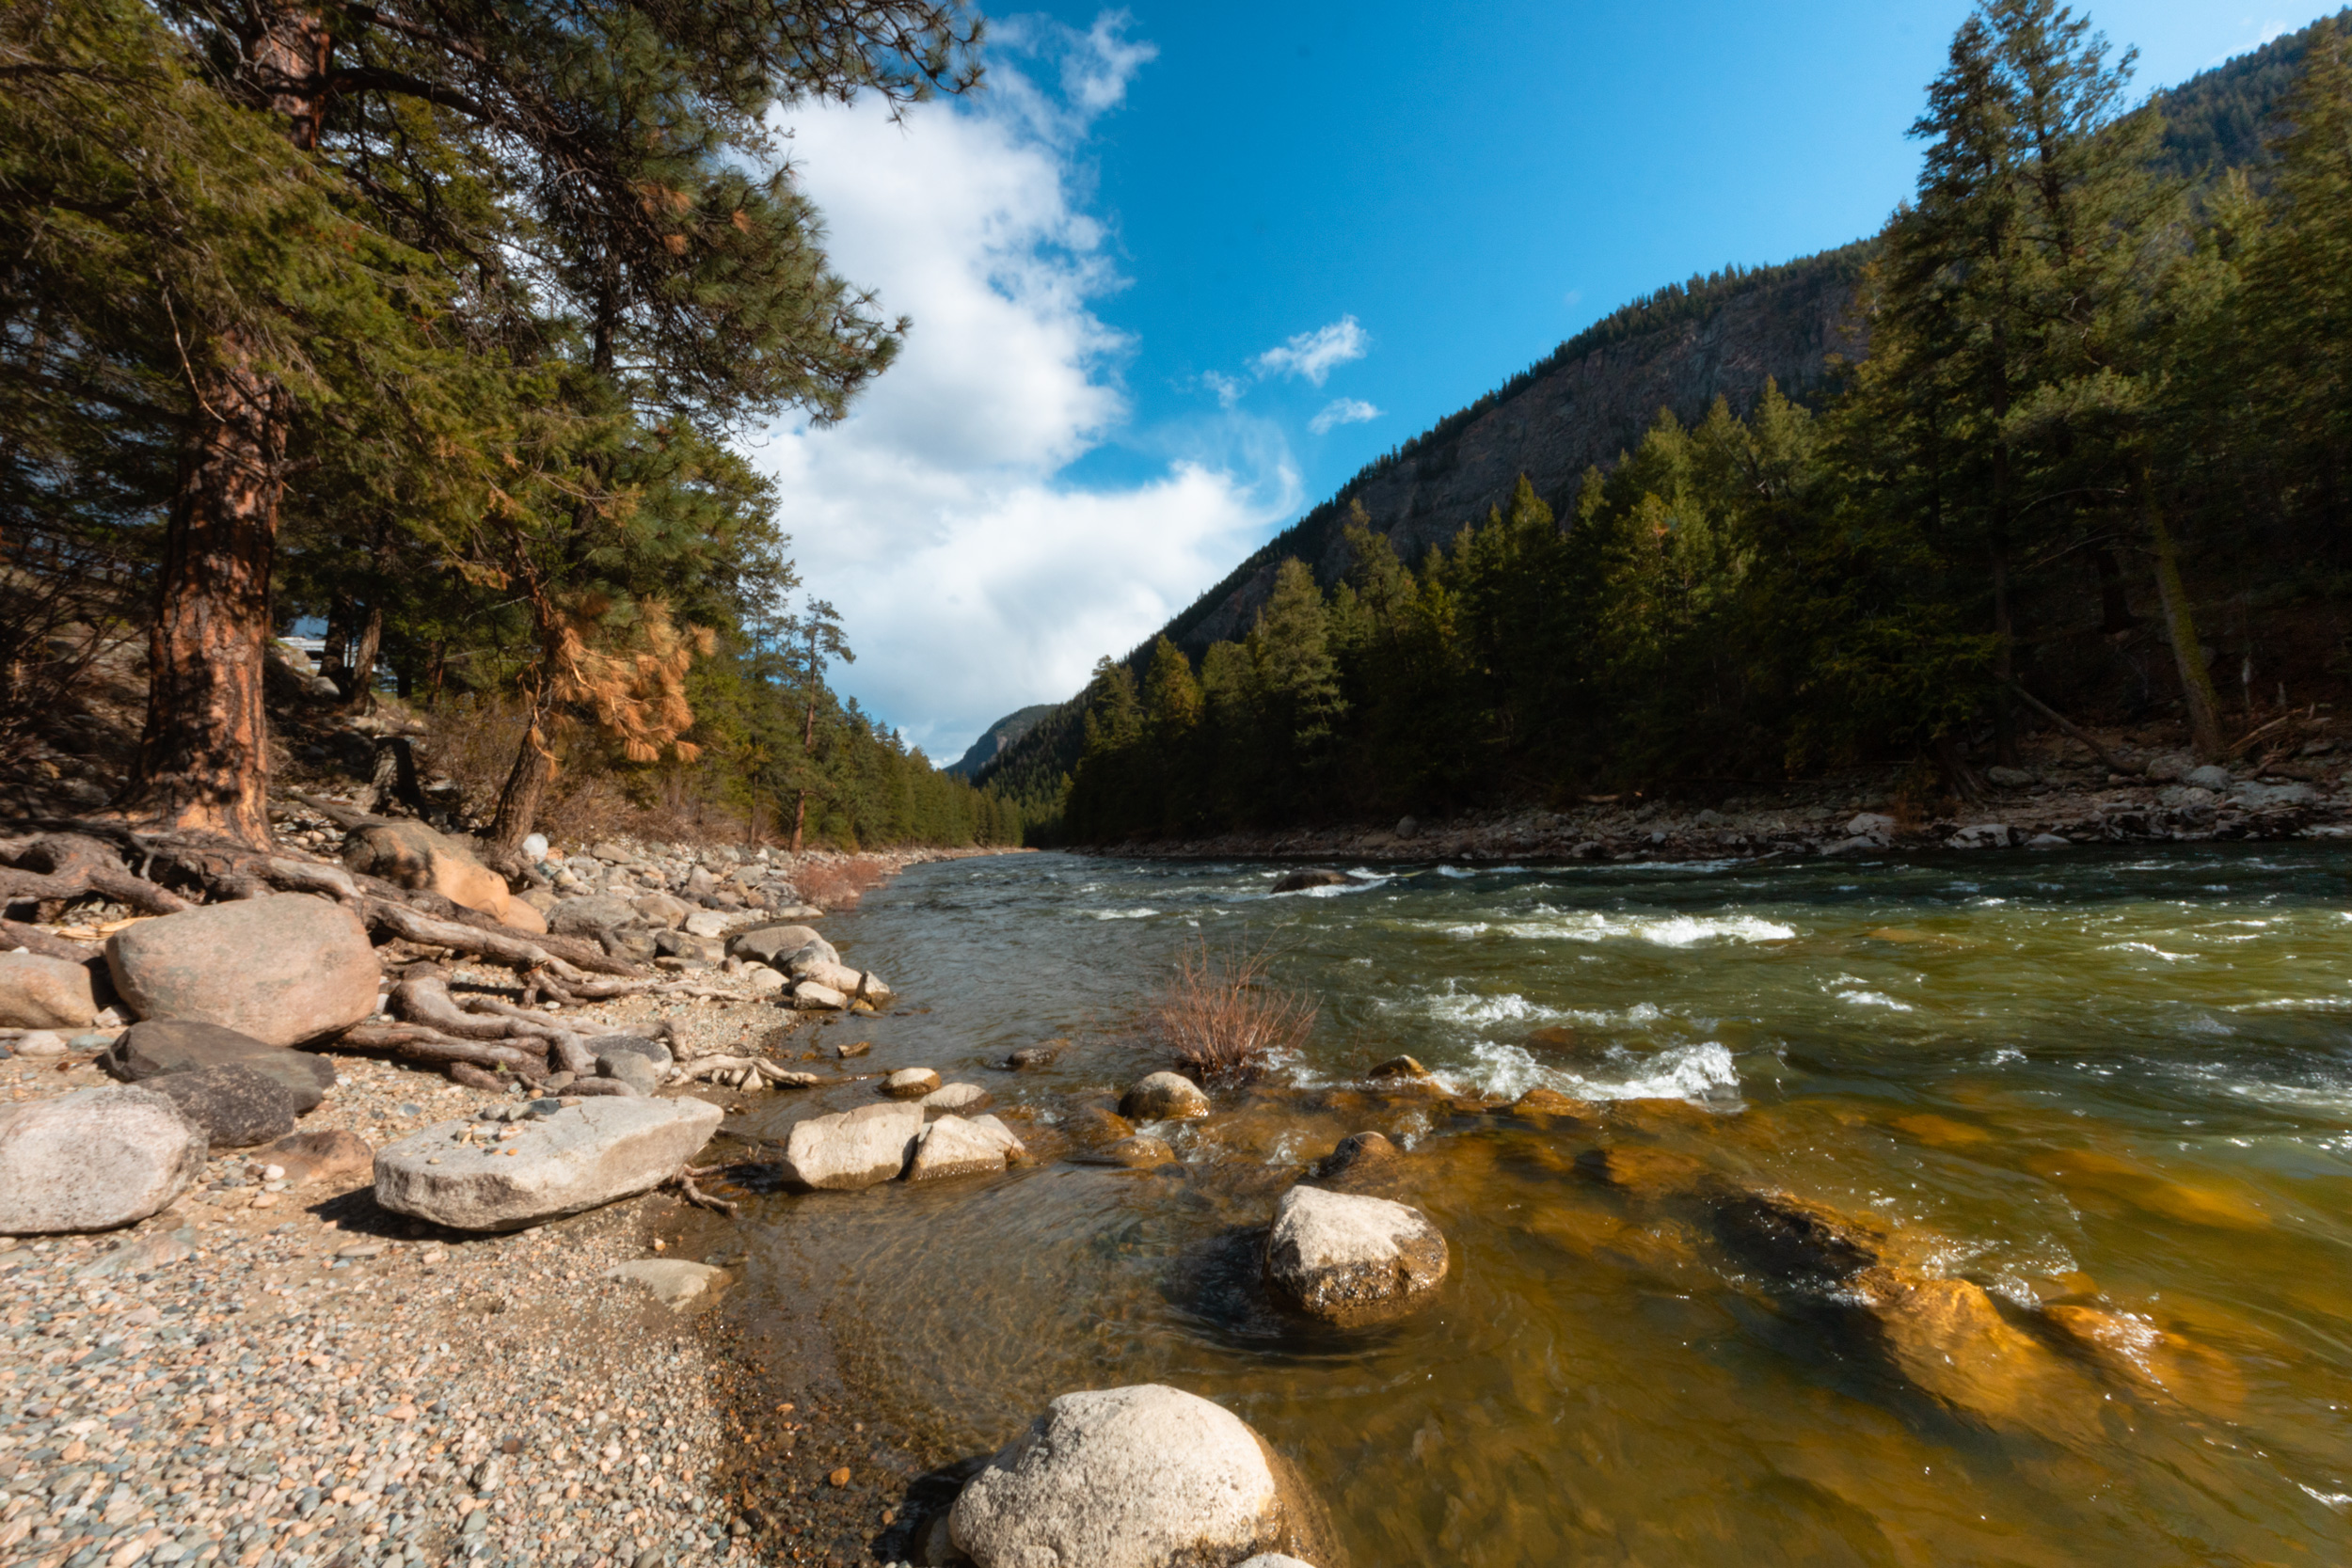 Private beach on the Similkameen River at Stemwinder Provincial Park